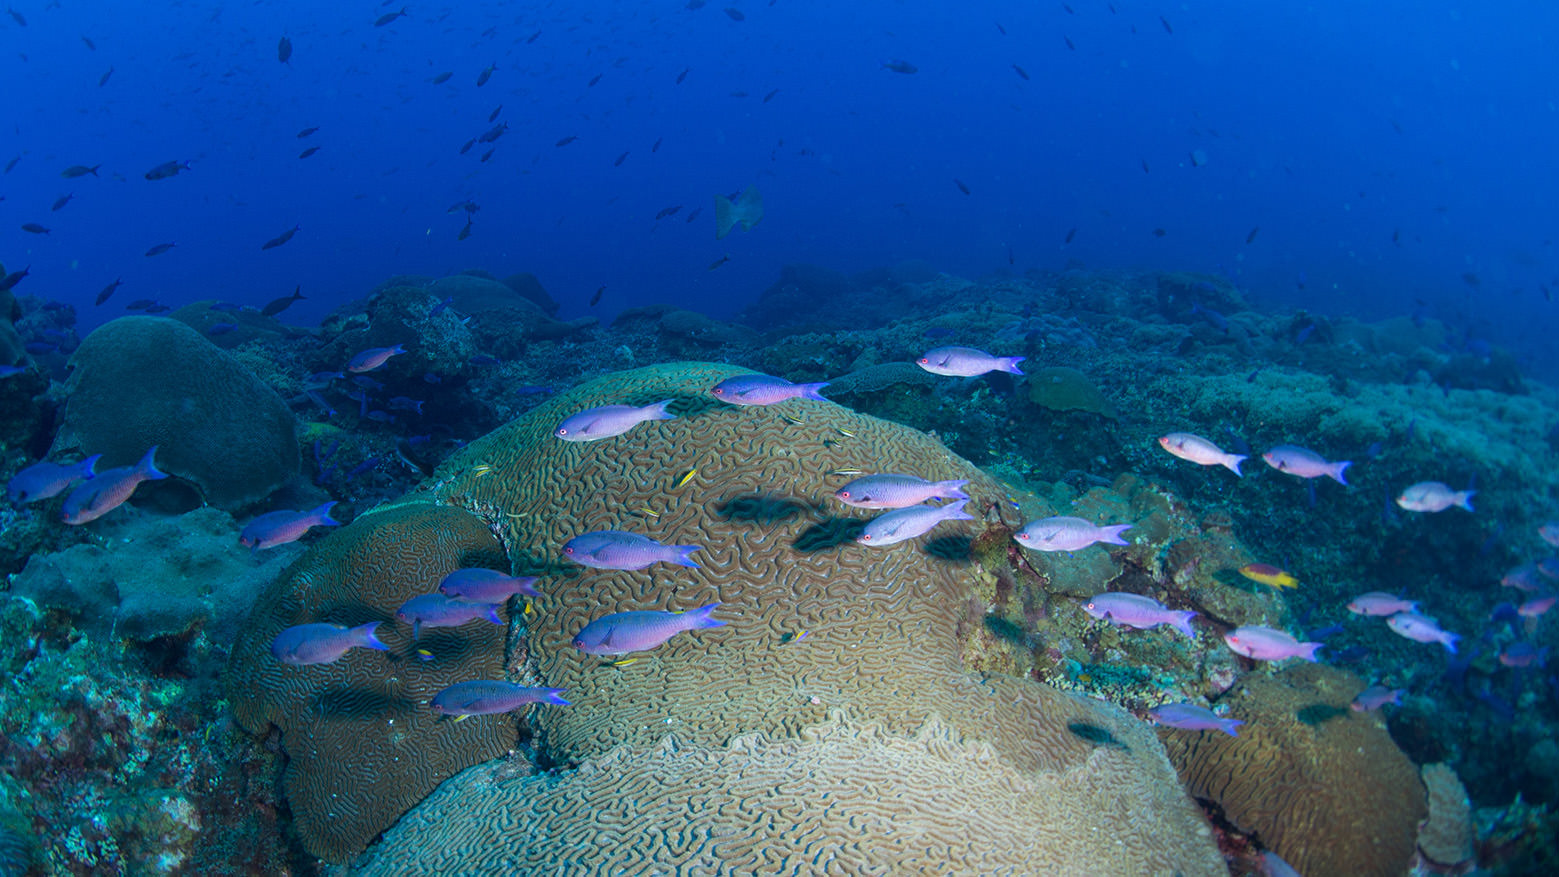 A school of purple fish swimming over healthy brain corals on the reef at East Flower Garden Bank